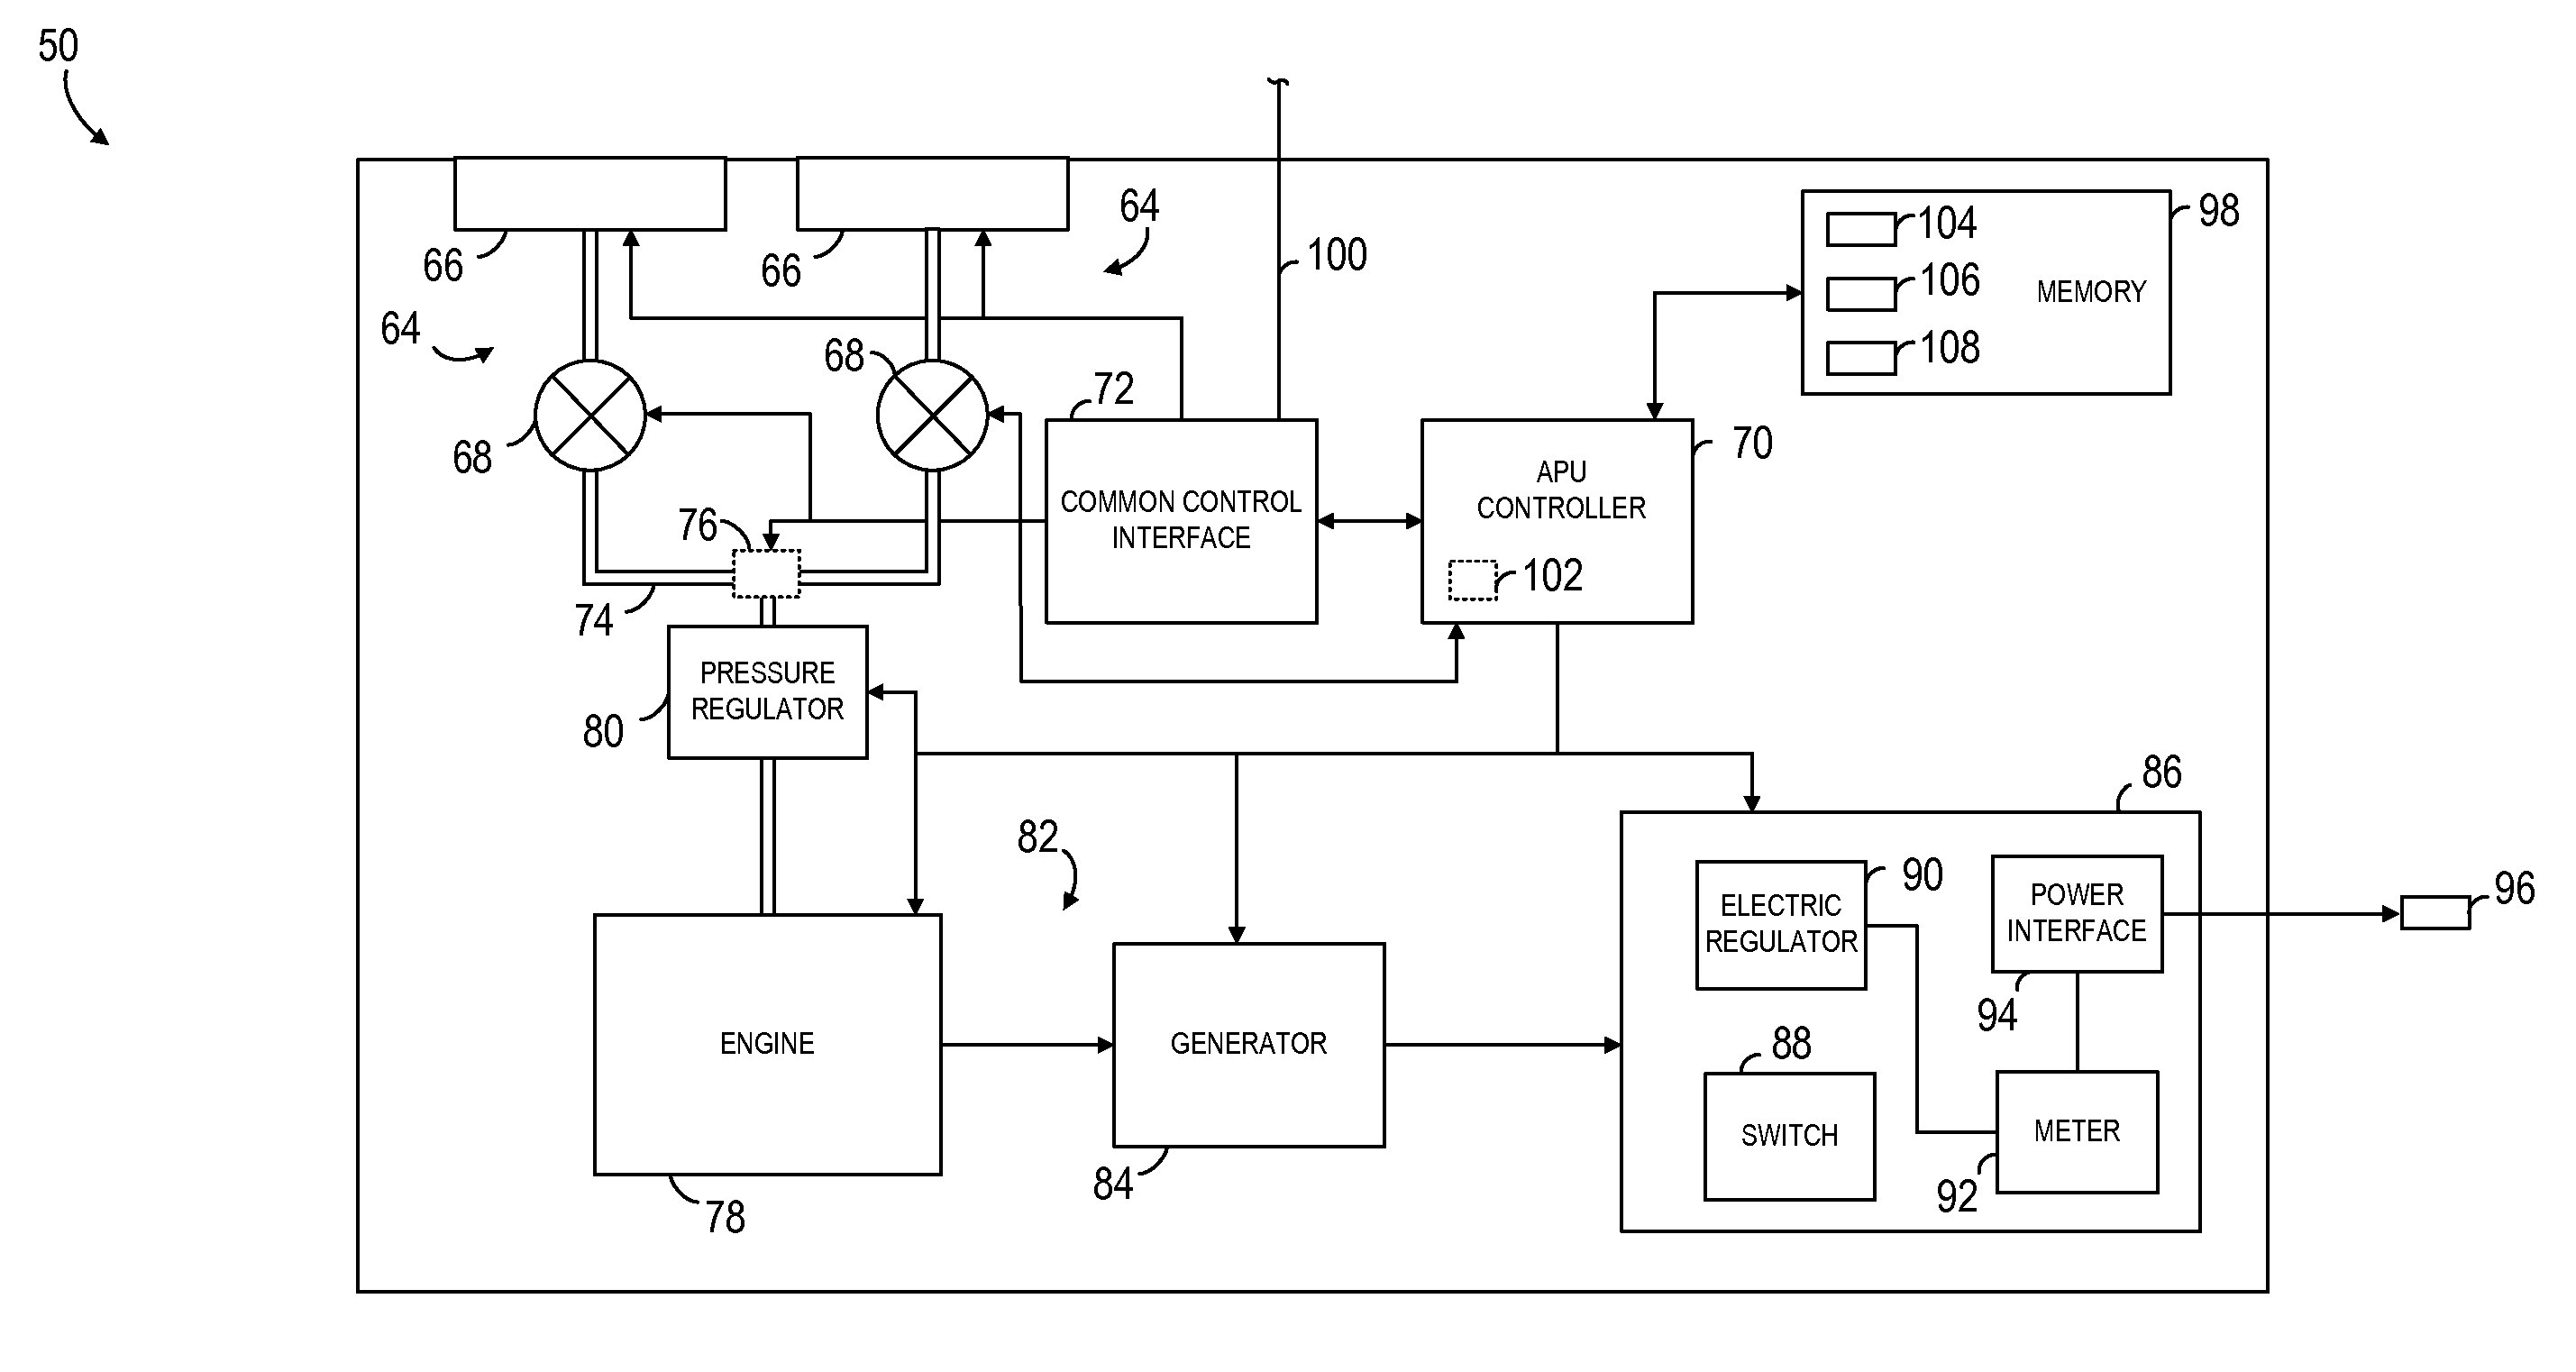 Auxiliary power unit assembly and method of use